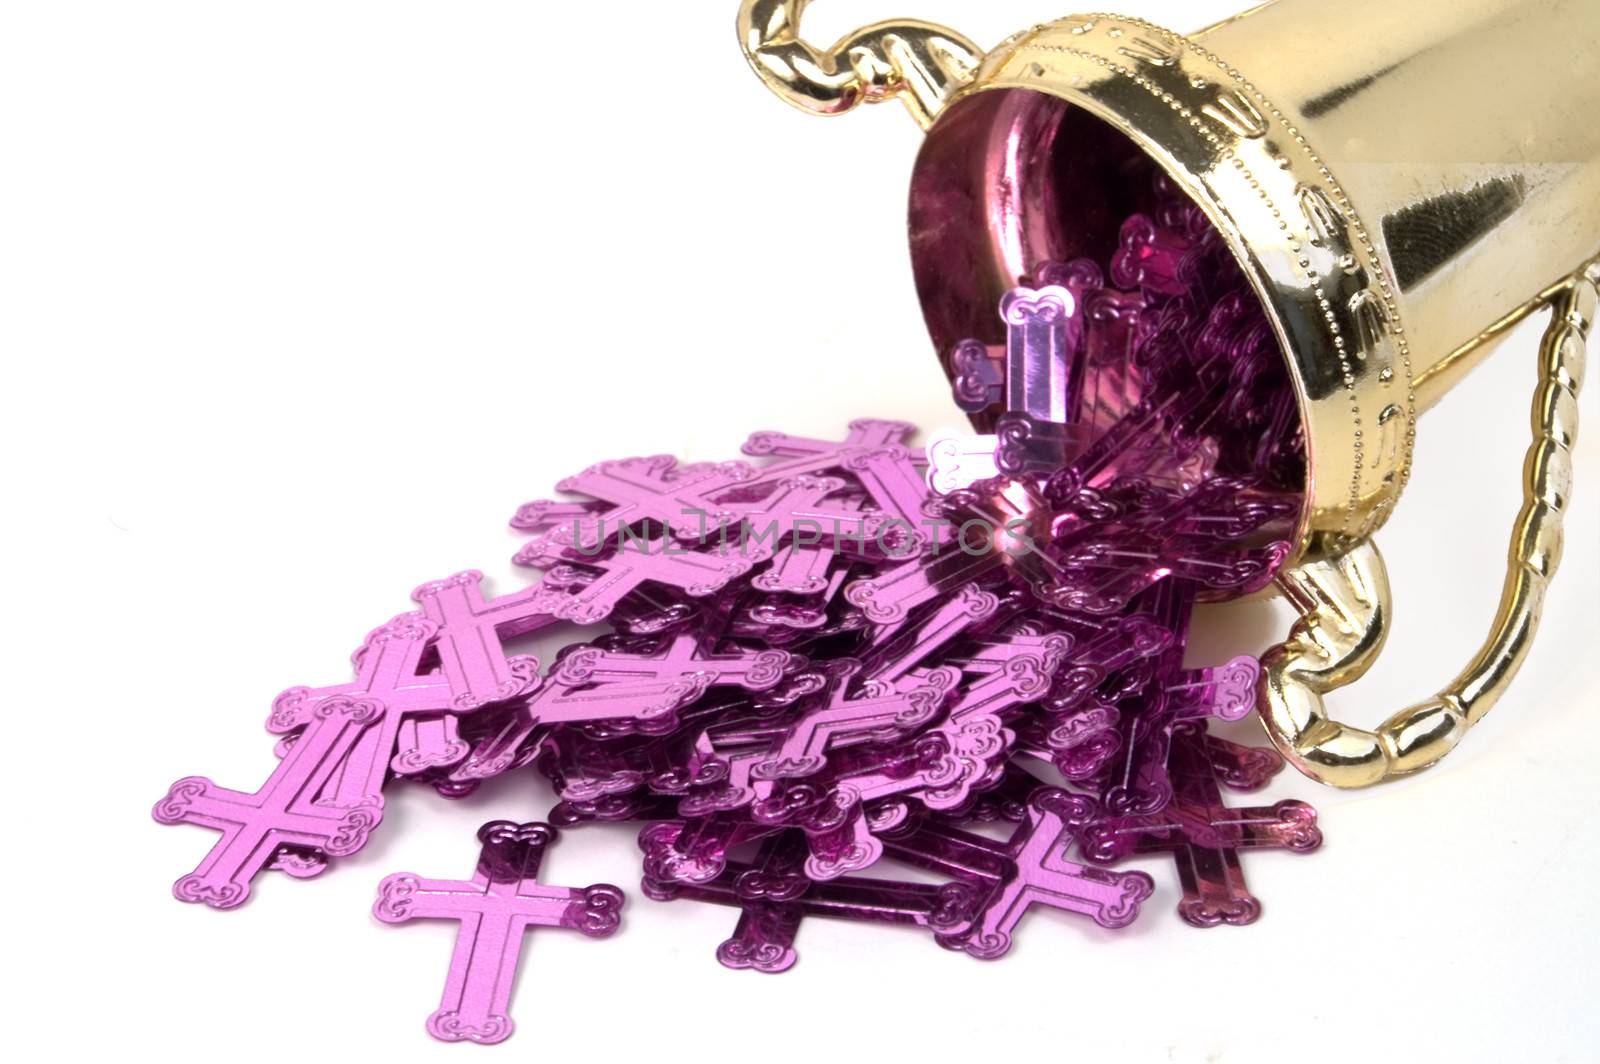 Purple crosses spill out of a golden chalice.